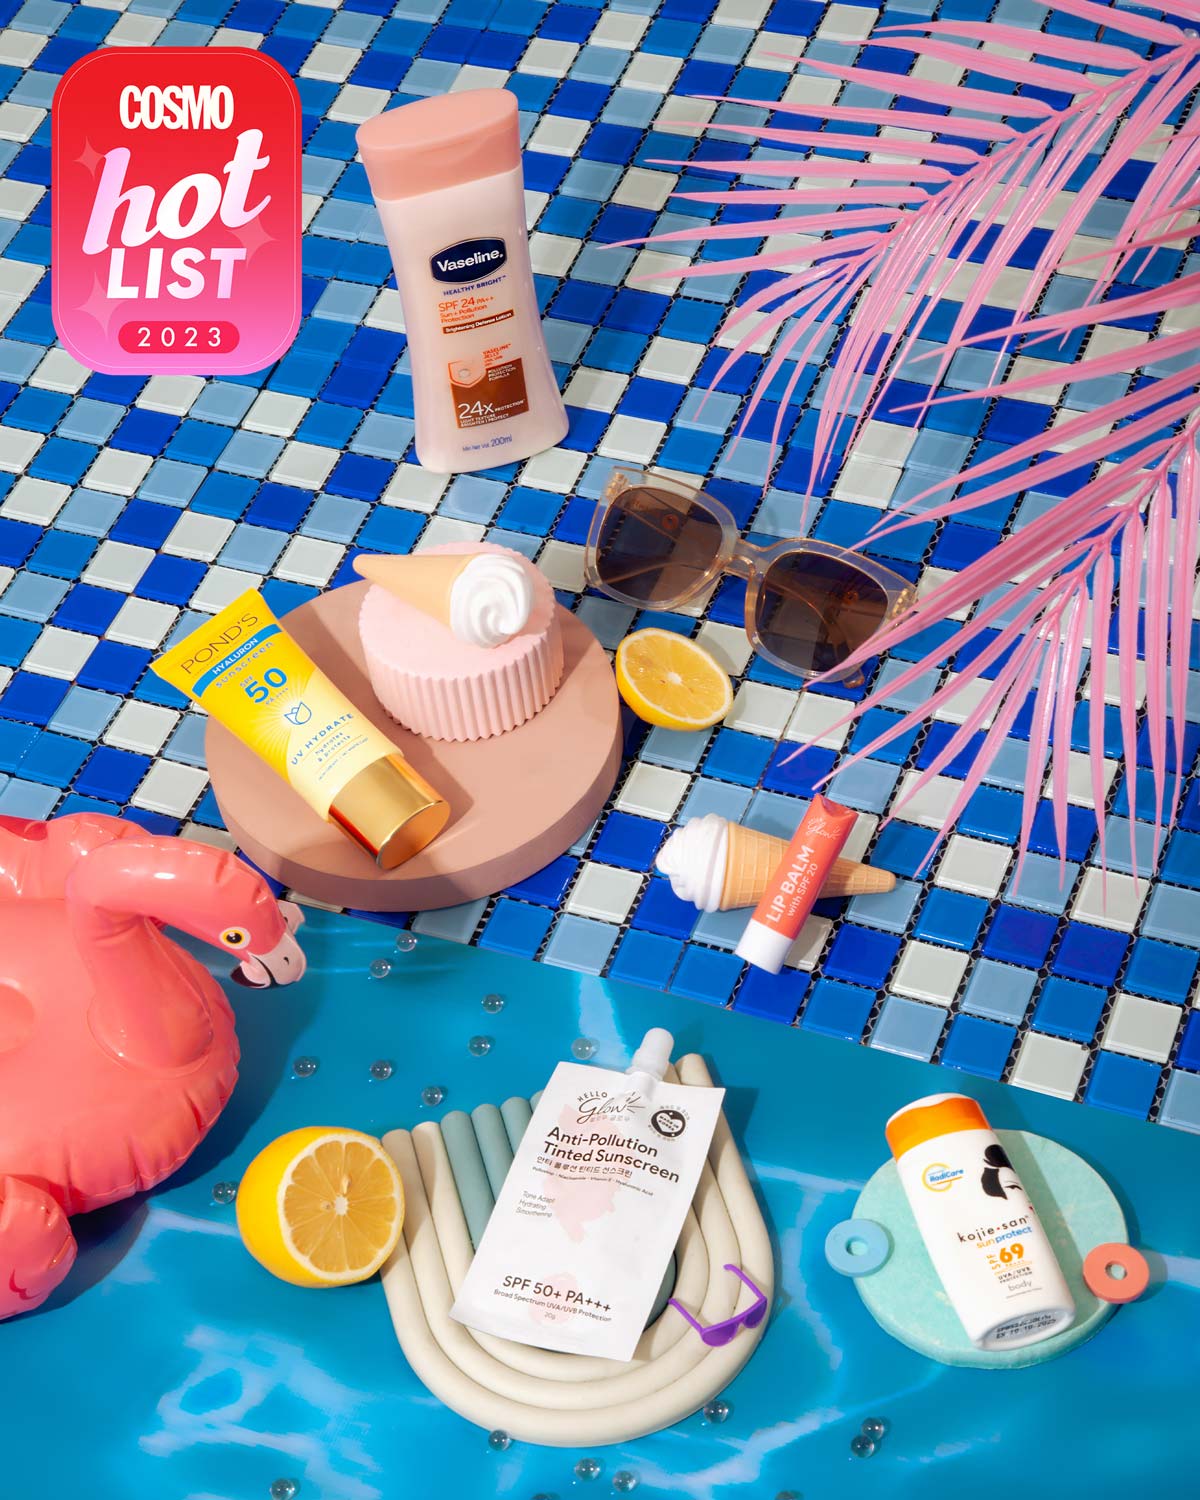 Cosmo Hot List 2023: Sun care products